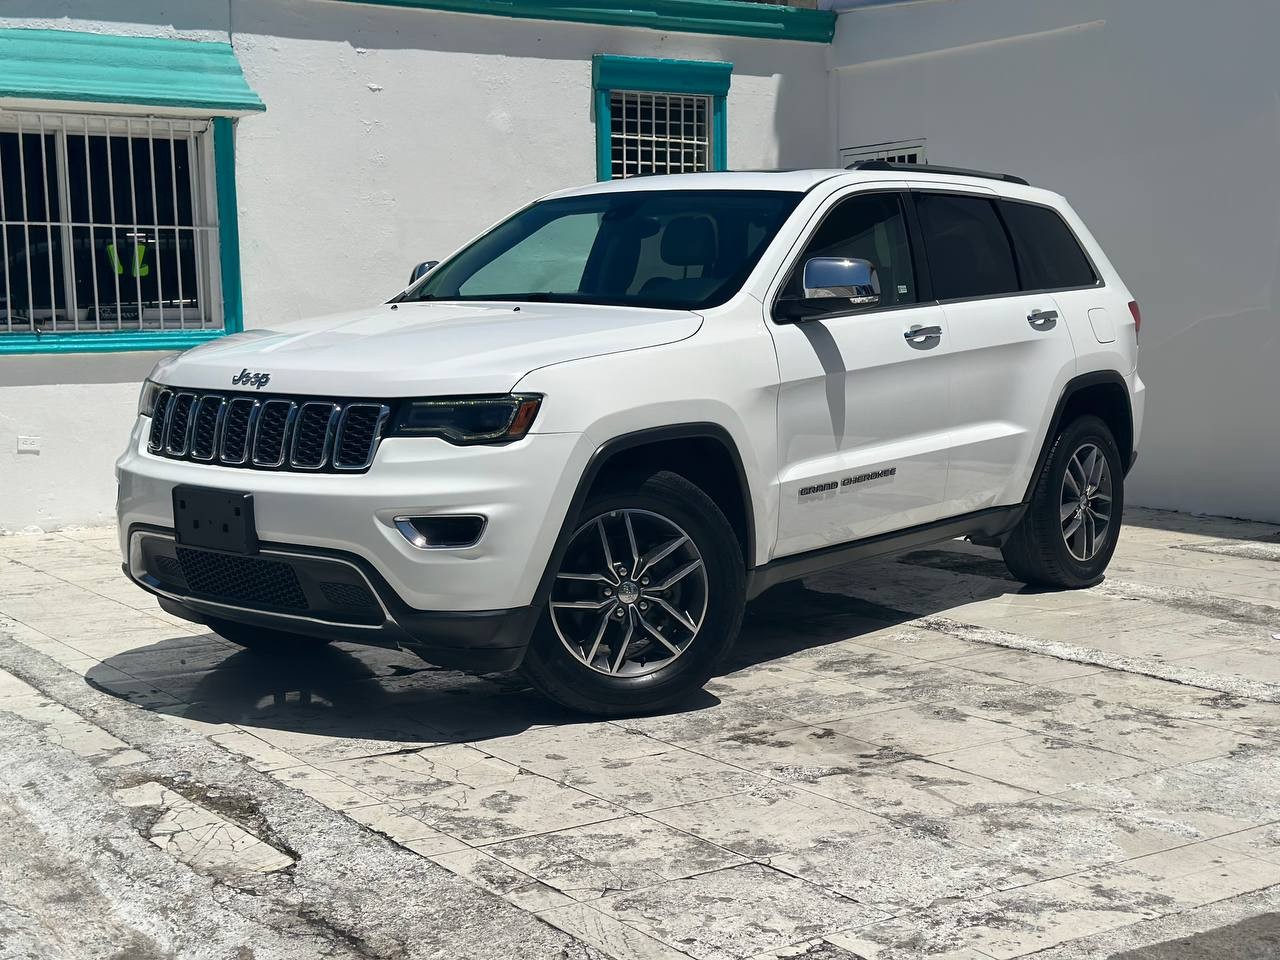 jeepetas y camionetas - JEEP GRAND CHEROKEE LLIMITED PANORAMICO 2018CLEAN CARFAX 2